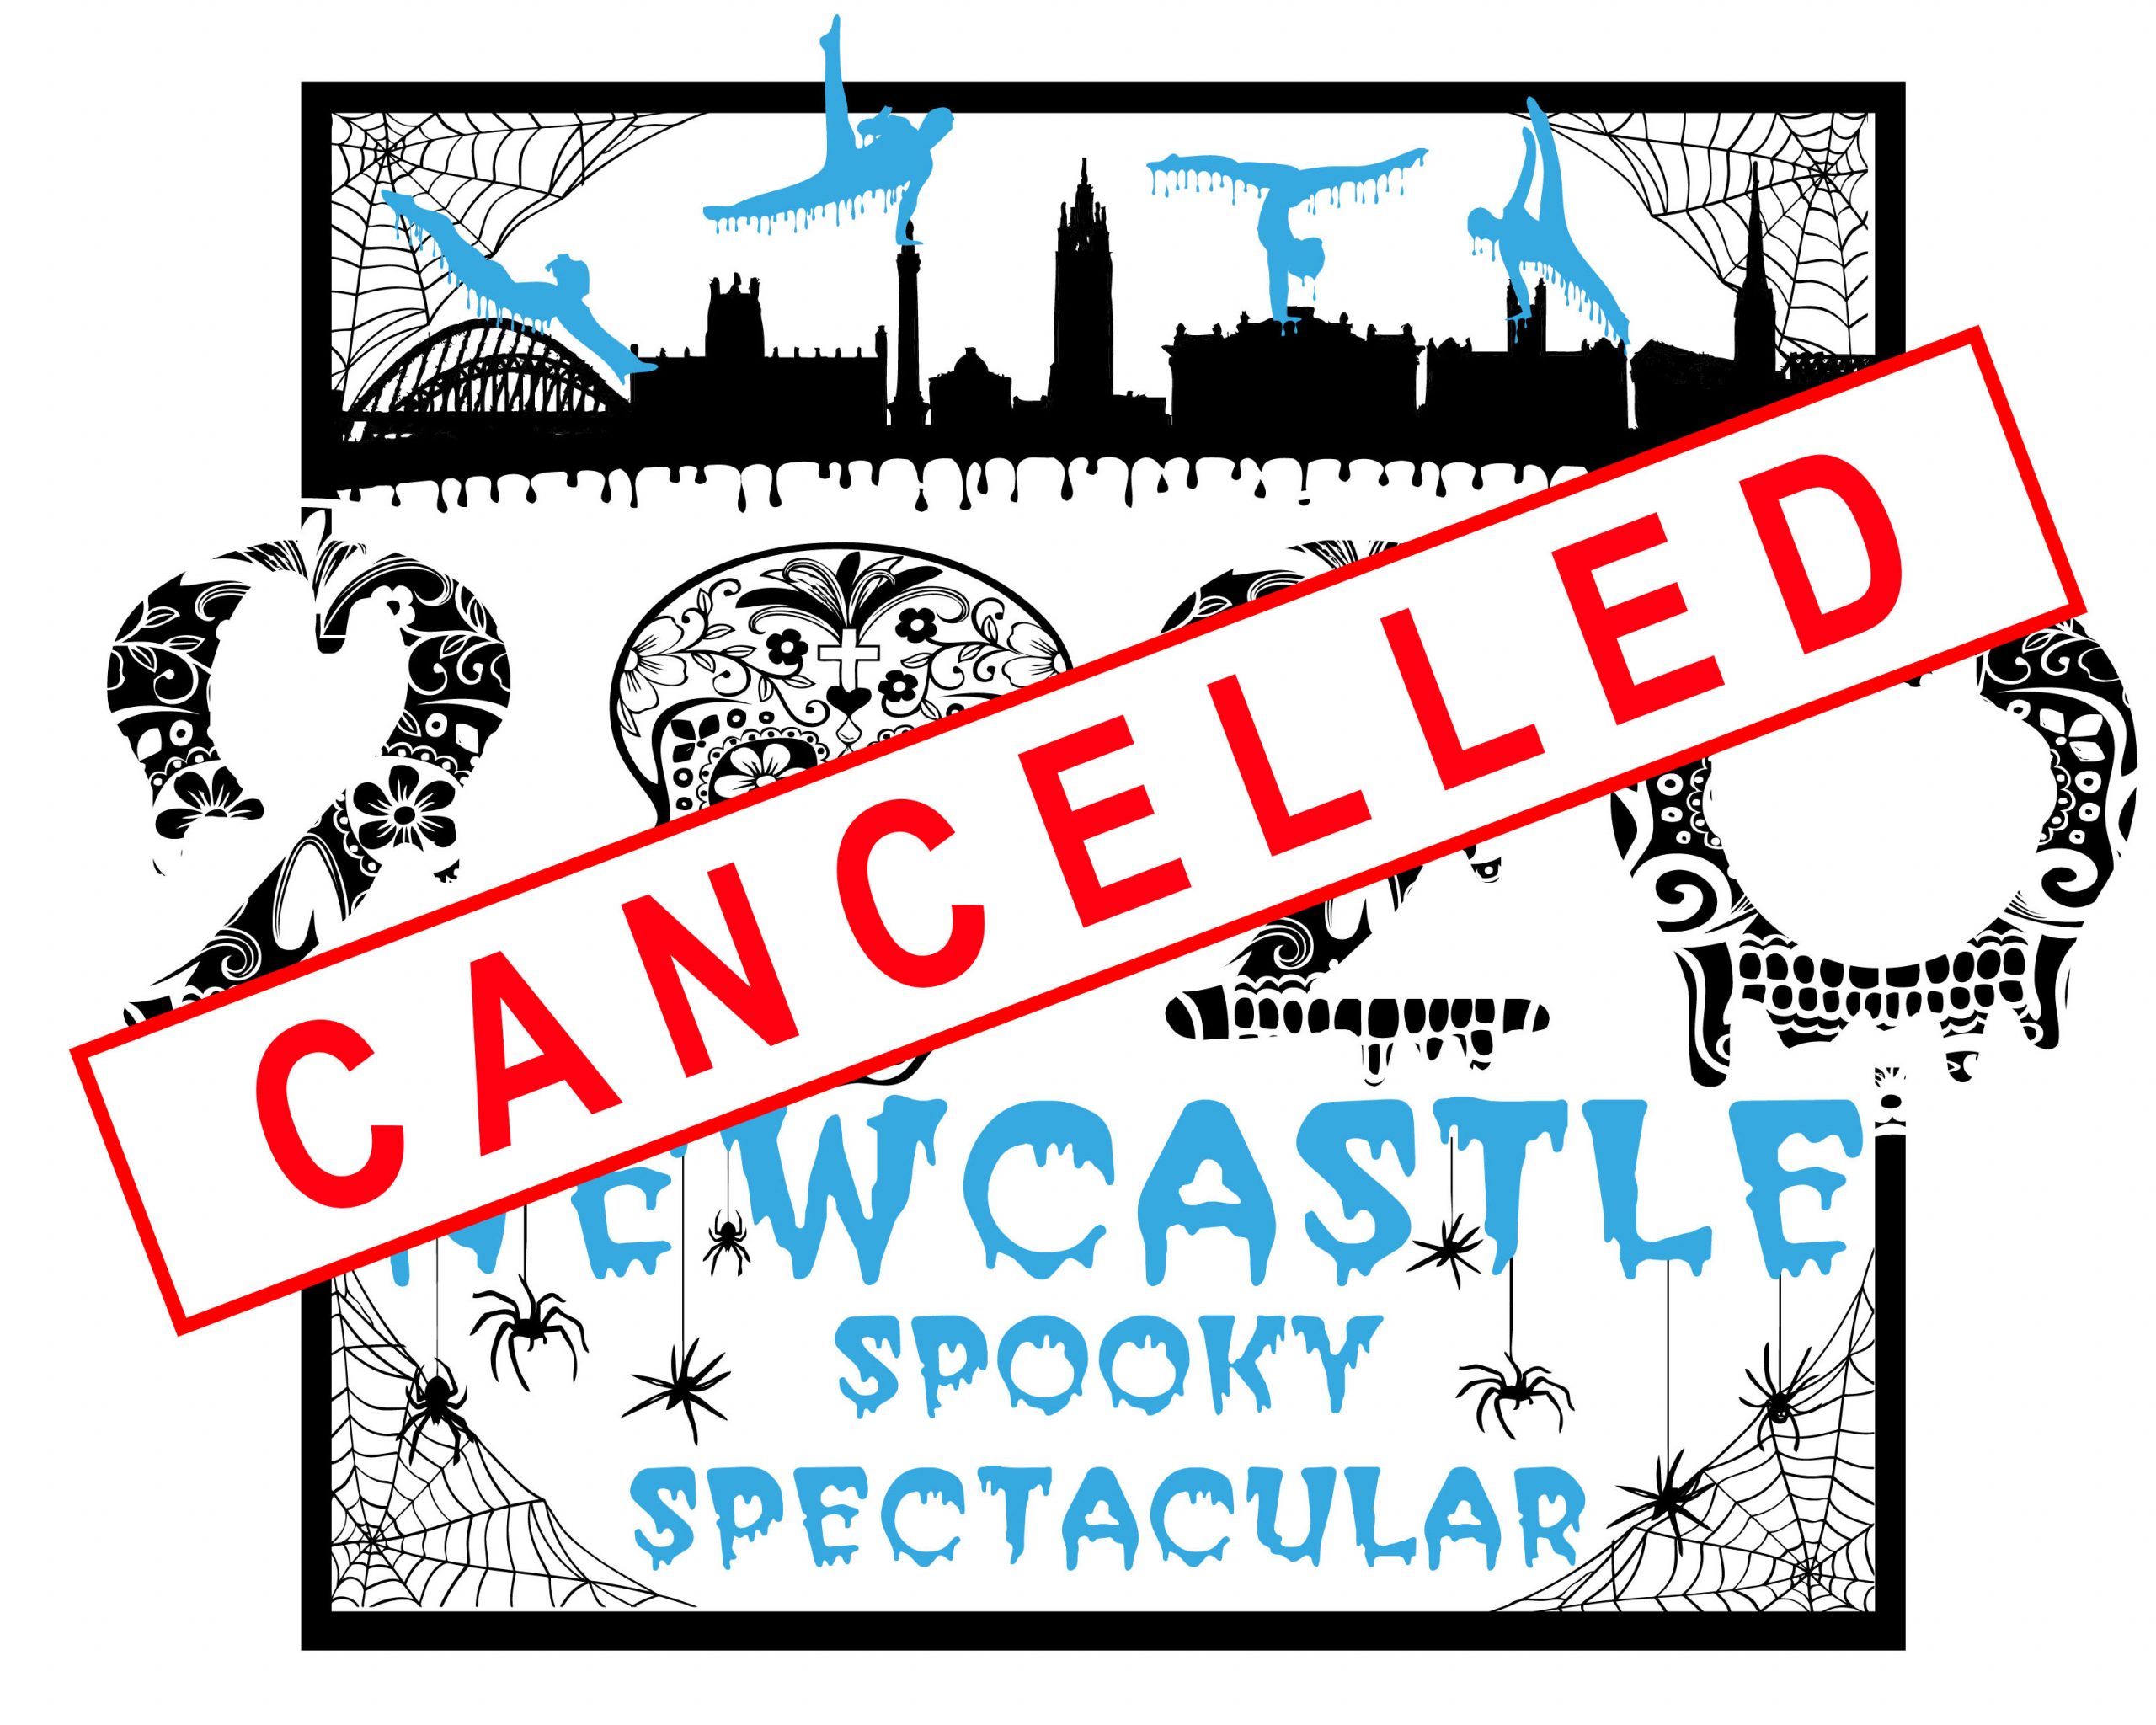 Spooky Spectacular 2020 - CANCELLED